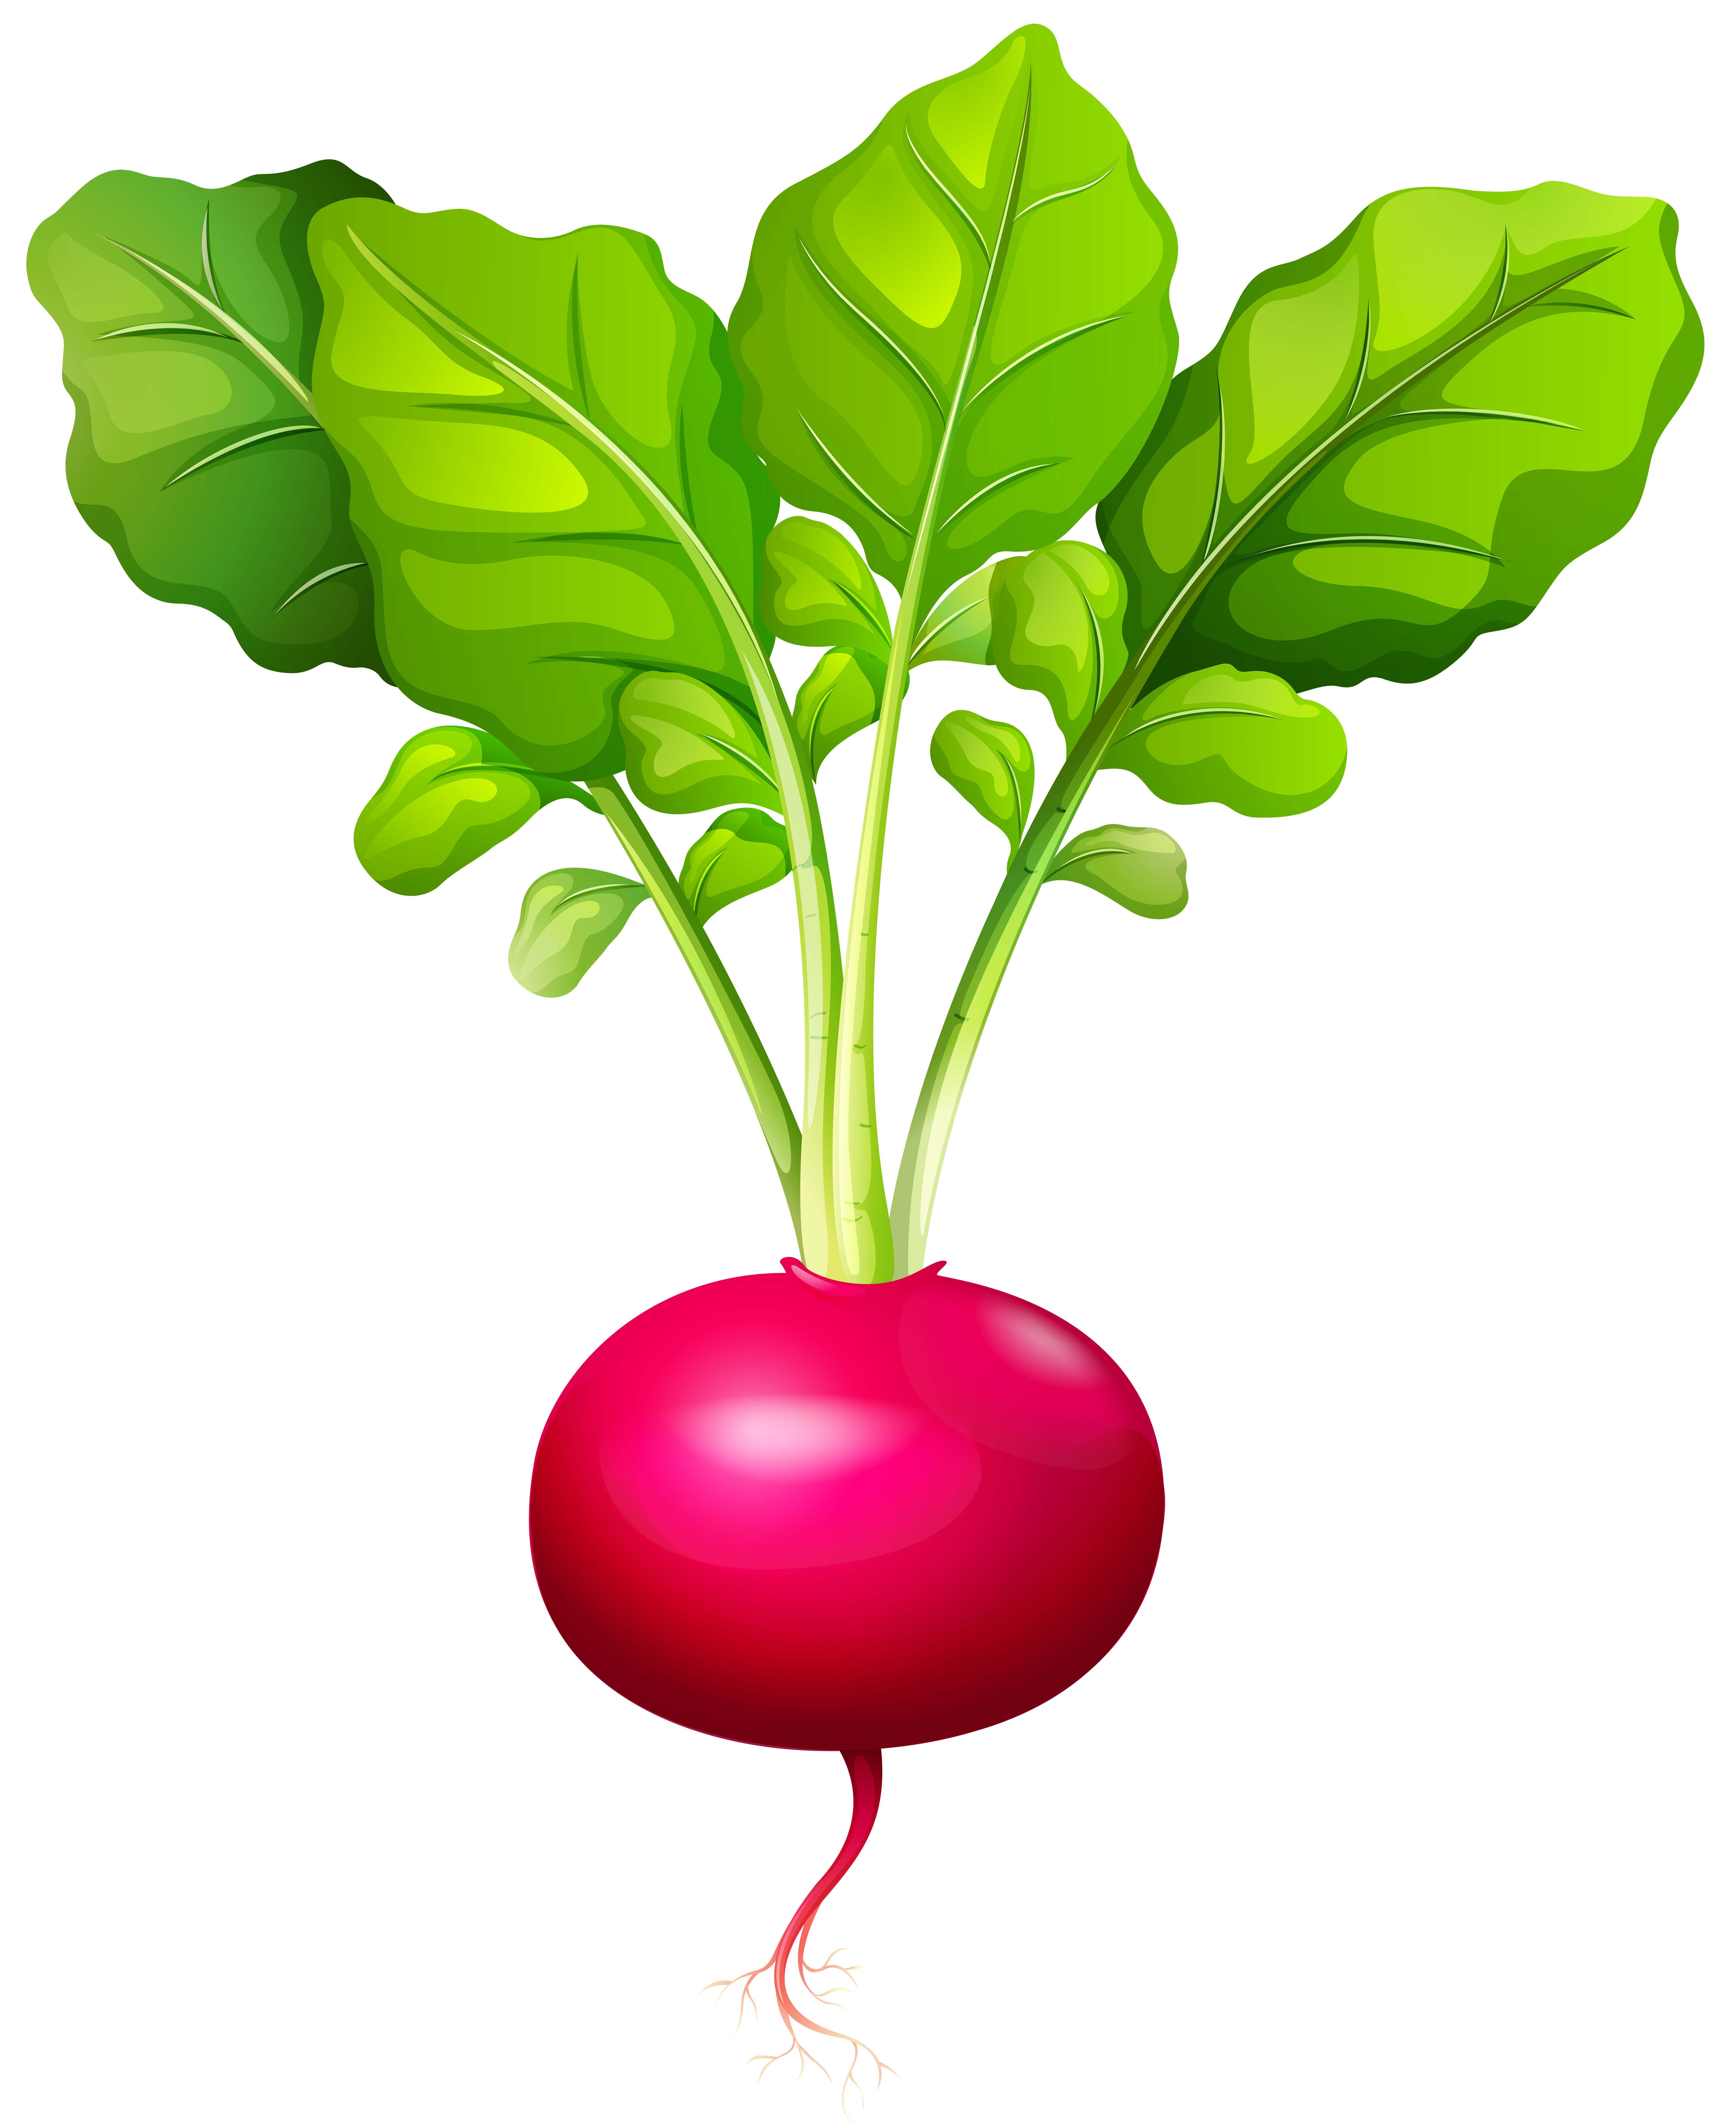 free clipart beets - photo #41